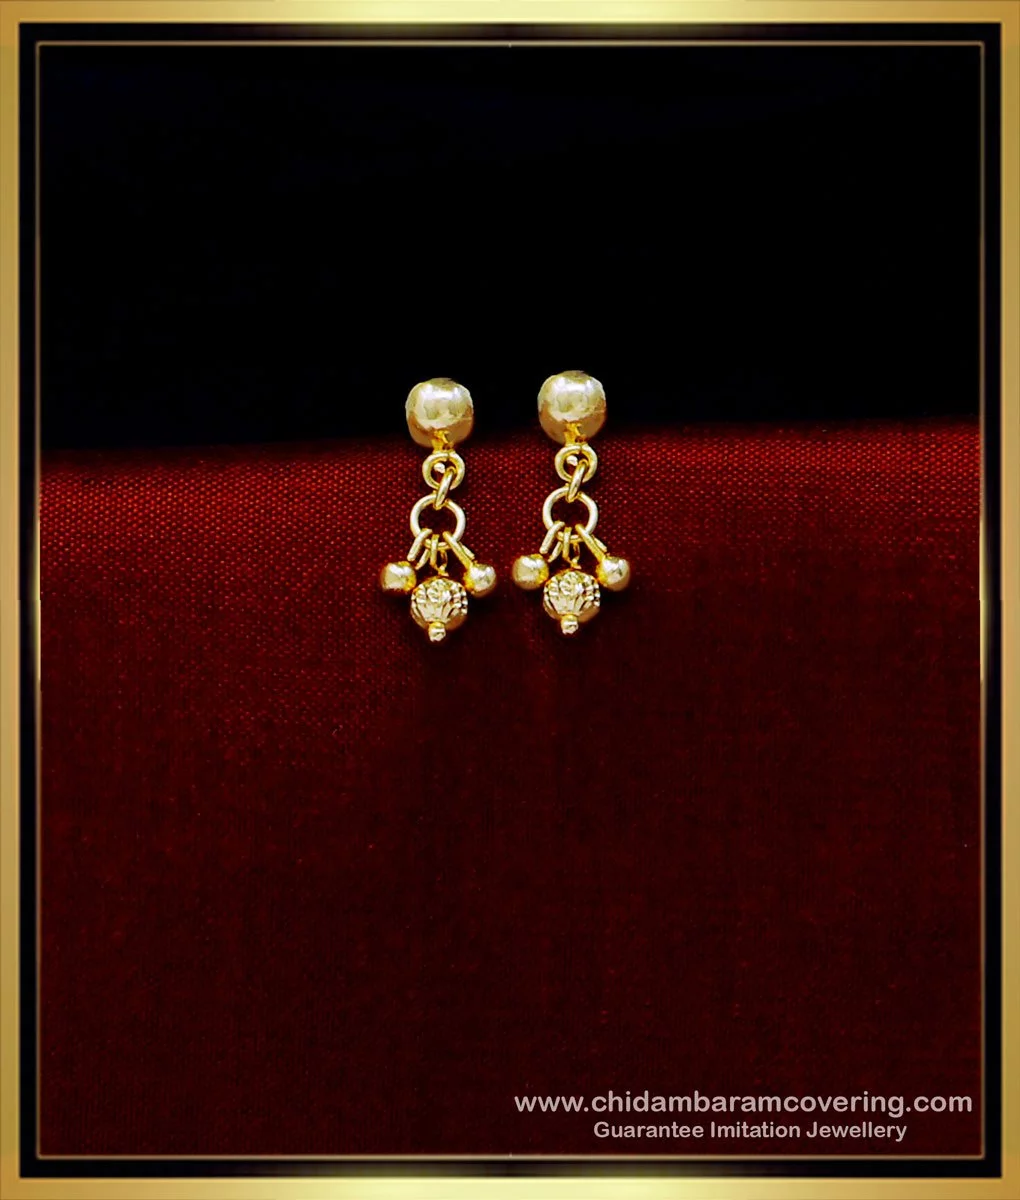 Discover more than 211 gold earrings 1 gram best